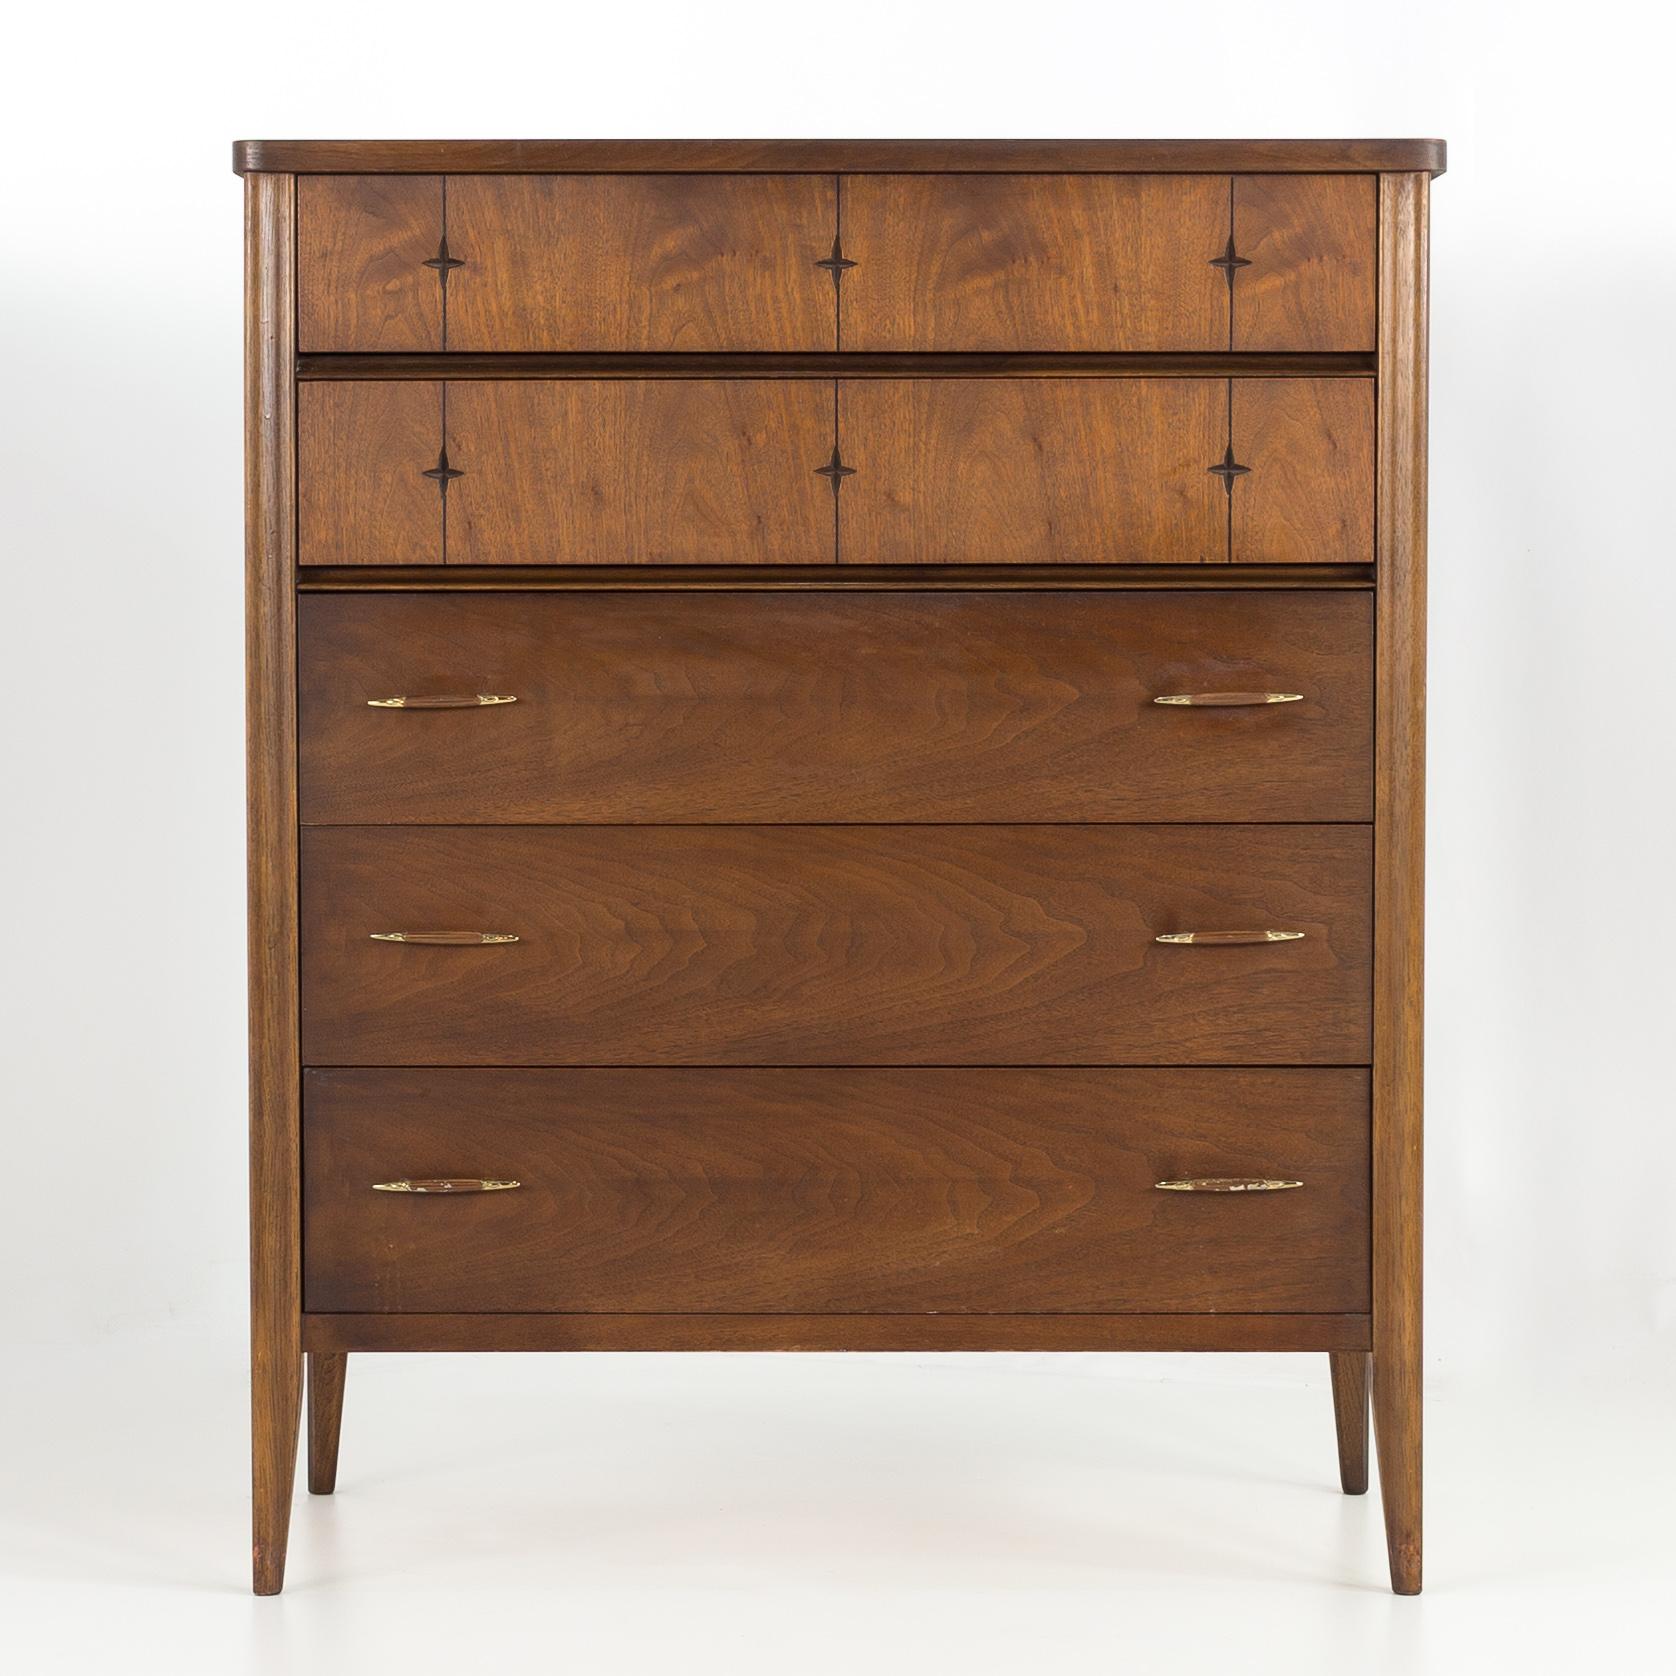 Broyhill saga mid century walnut 5 drawer highboy dresser
Dresser measures: 38.75 wide x 19 deep x 46.75 inches high

All pieces of furniture can be had in what we call restored vintage condition. That means the piece is restored upon purchase so